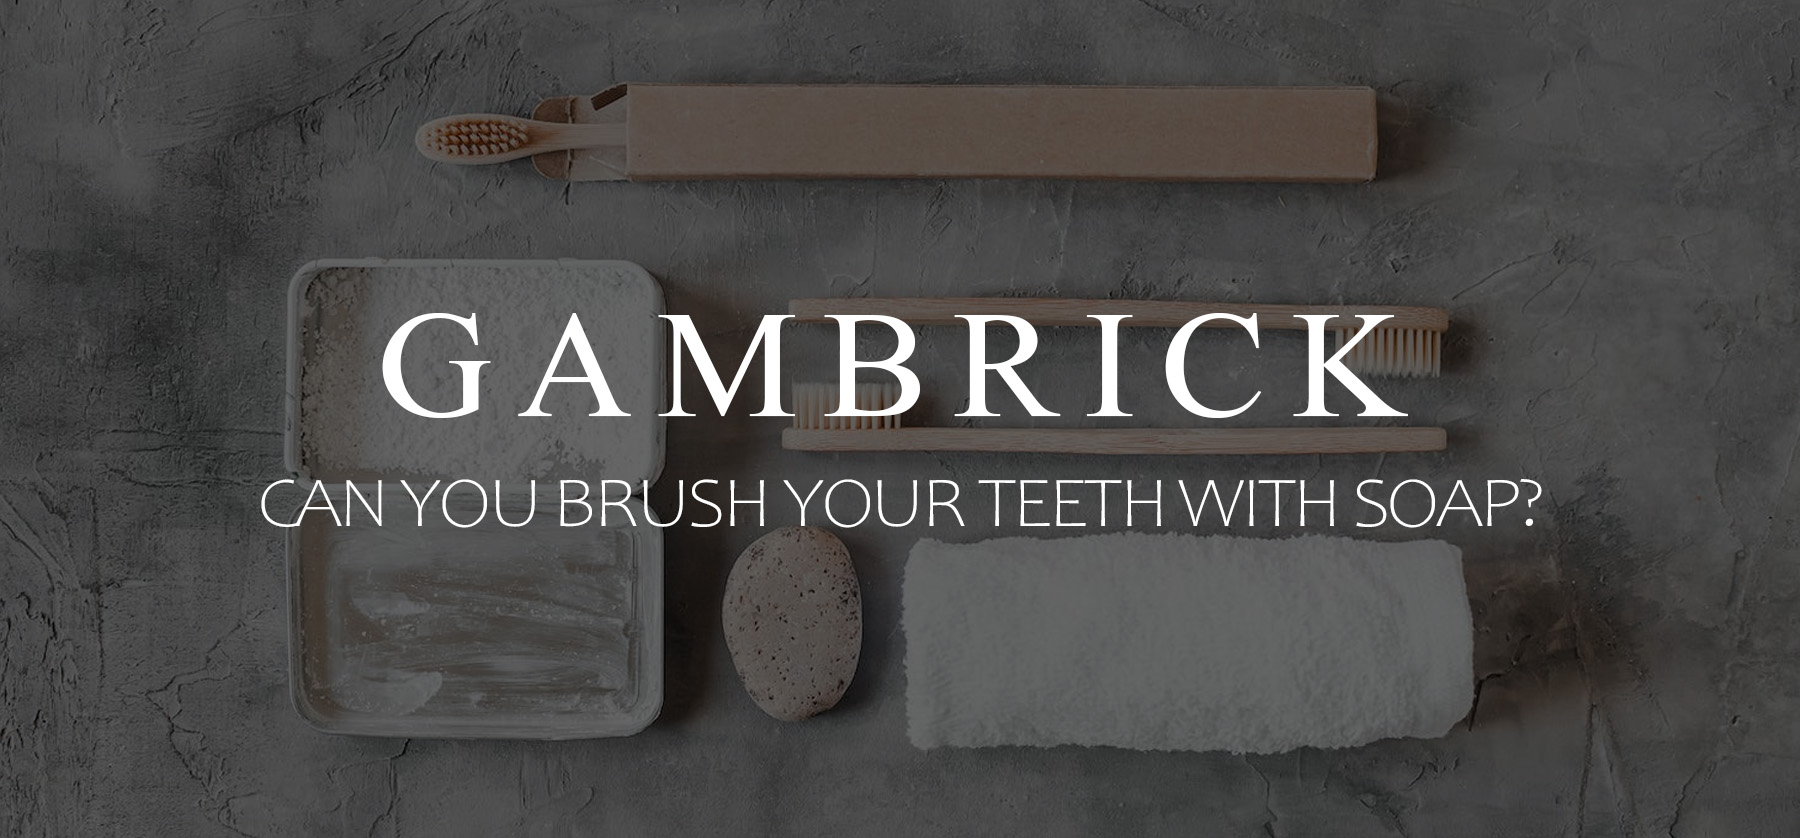 can you brush your teeth with soap banner 1.1